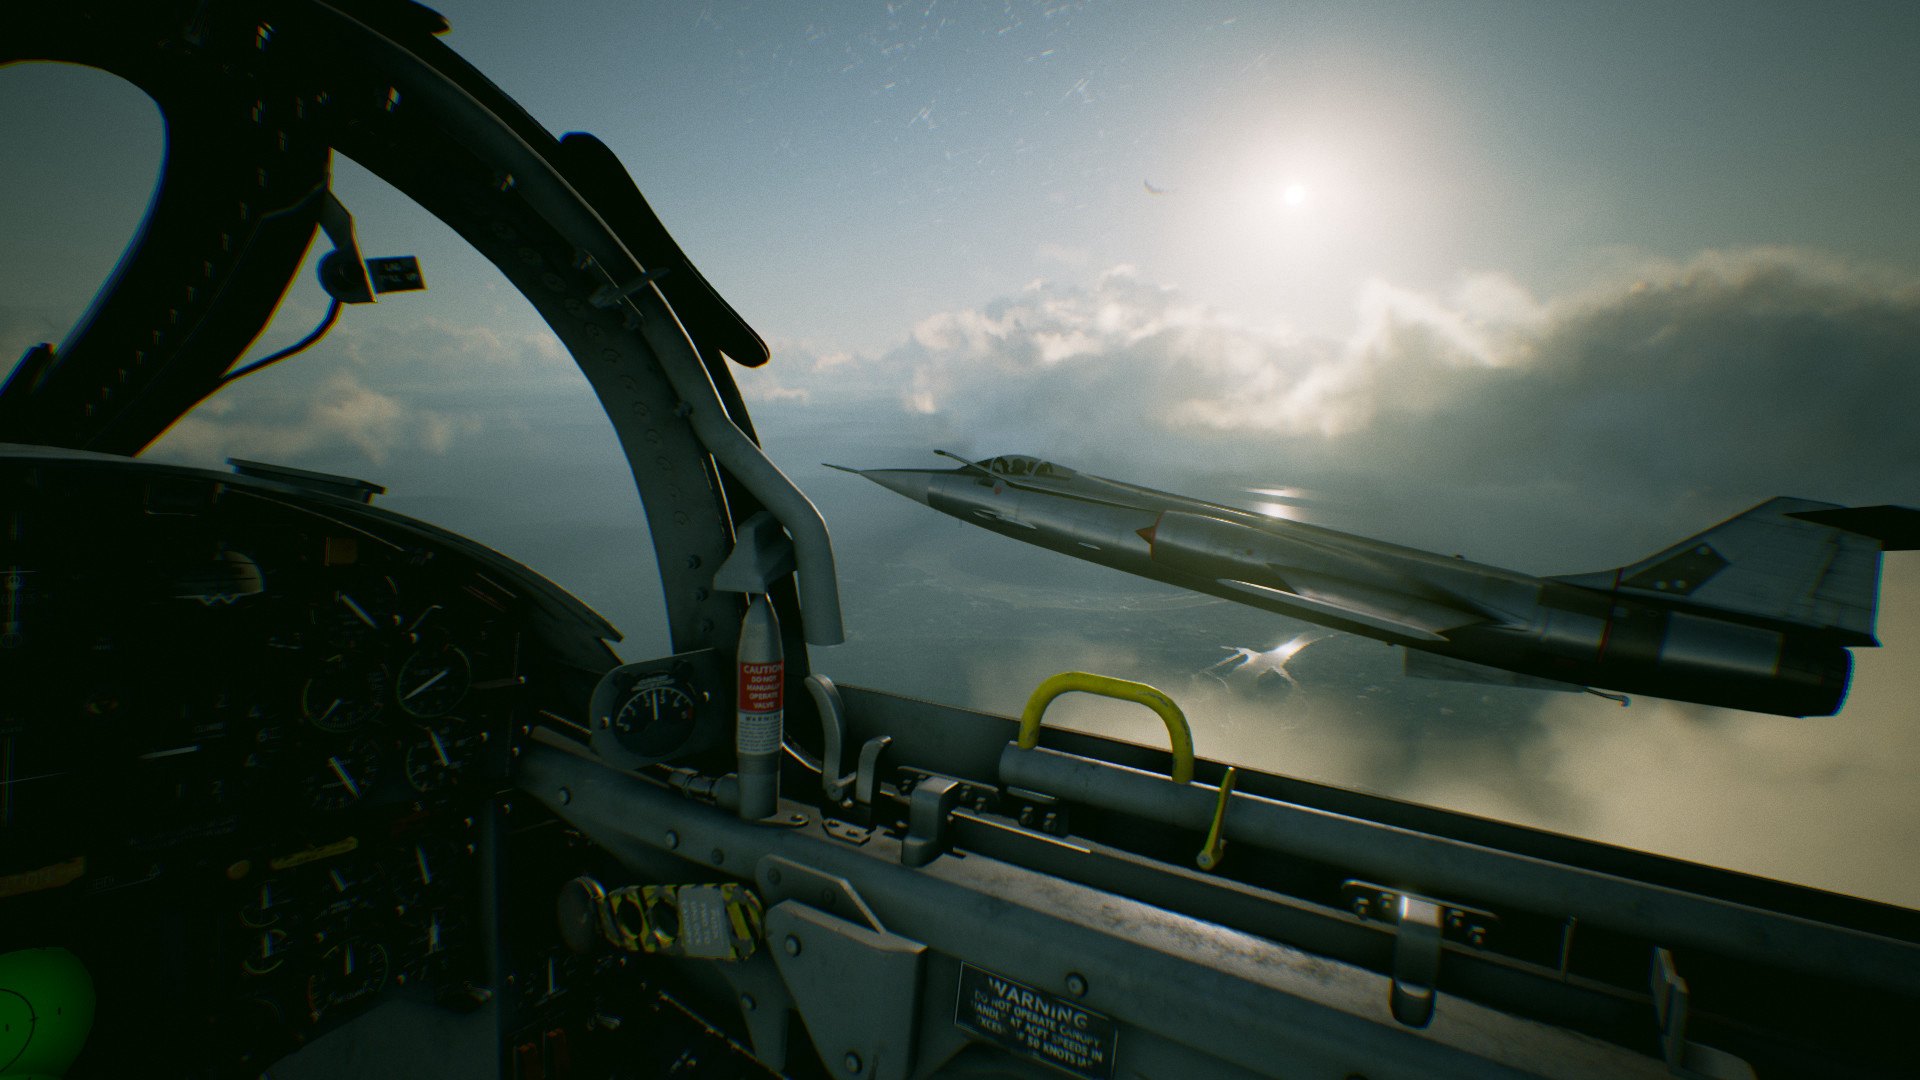 ACE COMBAT 7: SKIES UNKNOWN Steam Account